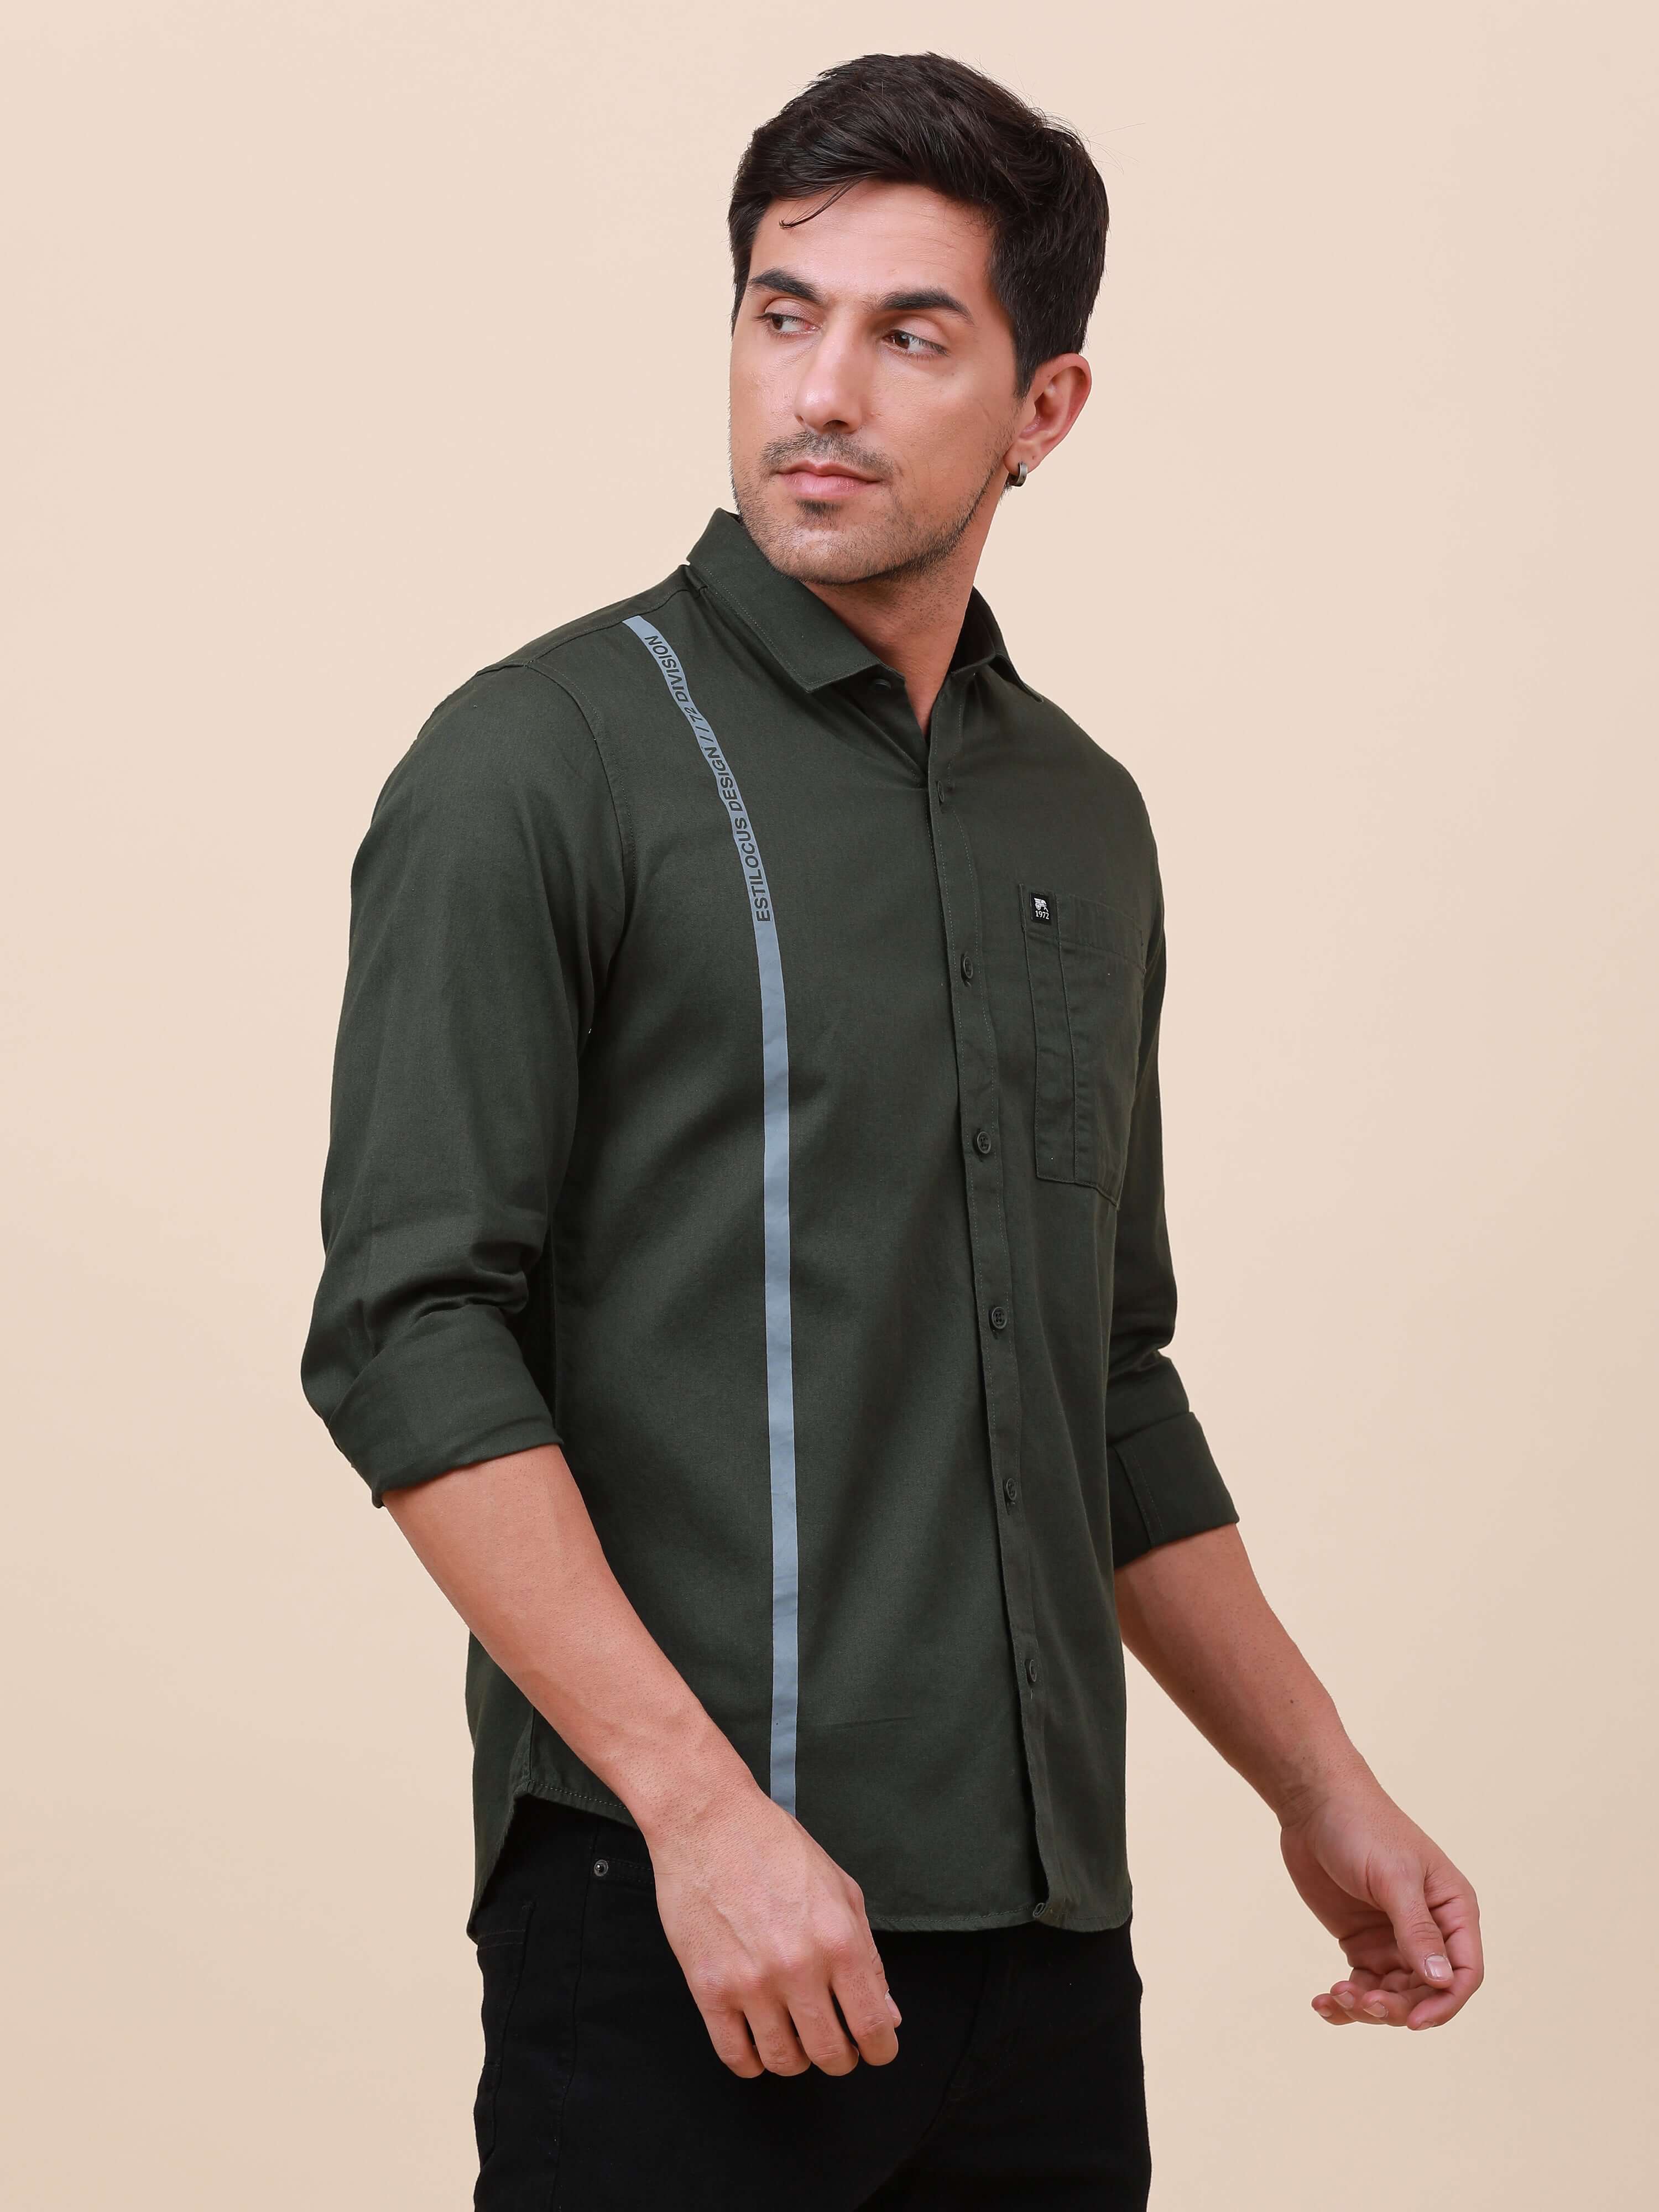 Dark Green Solid Single Pocket full sleeve shirt shop online at Estilocus. 100% Cotton ,Full-sleeve solid shirt Cut and sew placket Regular collar Double button edge cuff Single pocket with flap Curved bottom hemline Finest printing at front placket. All